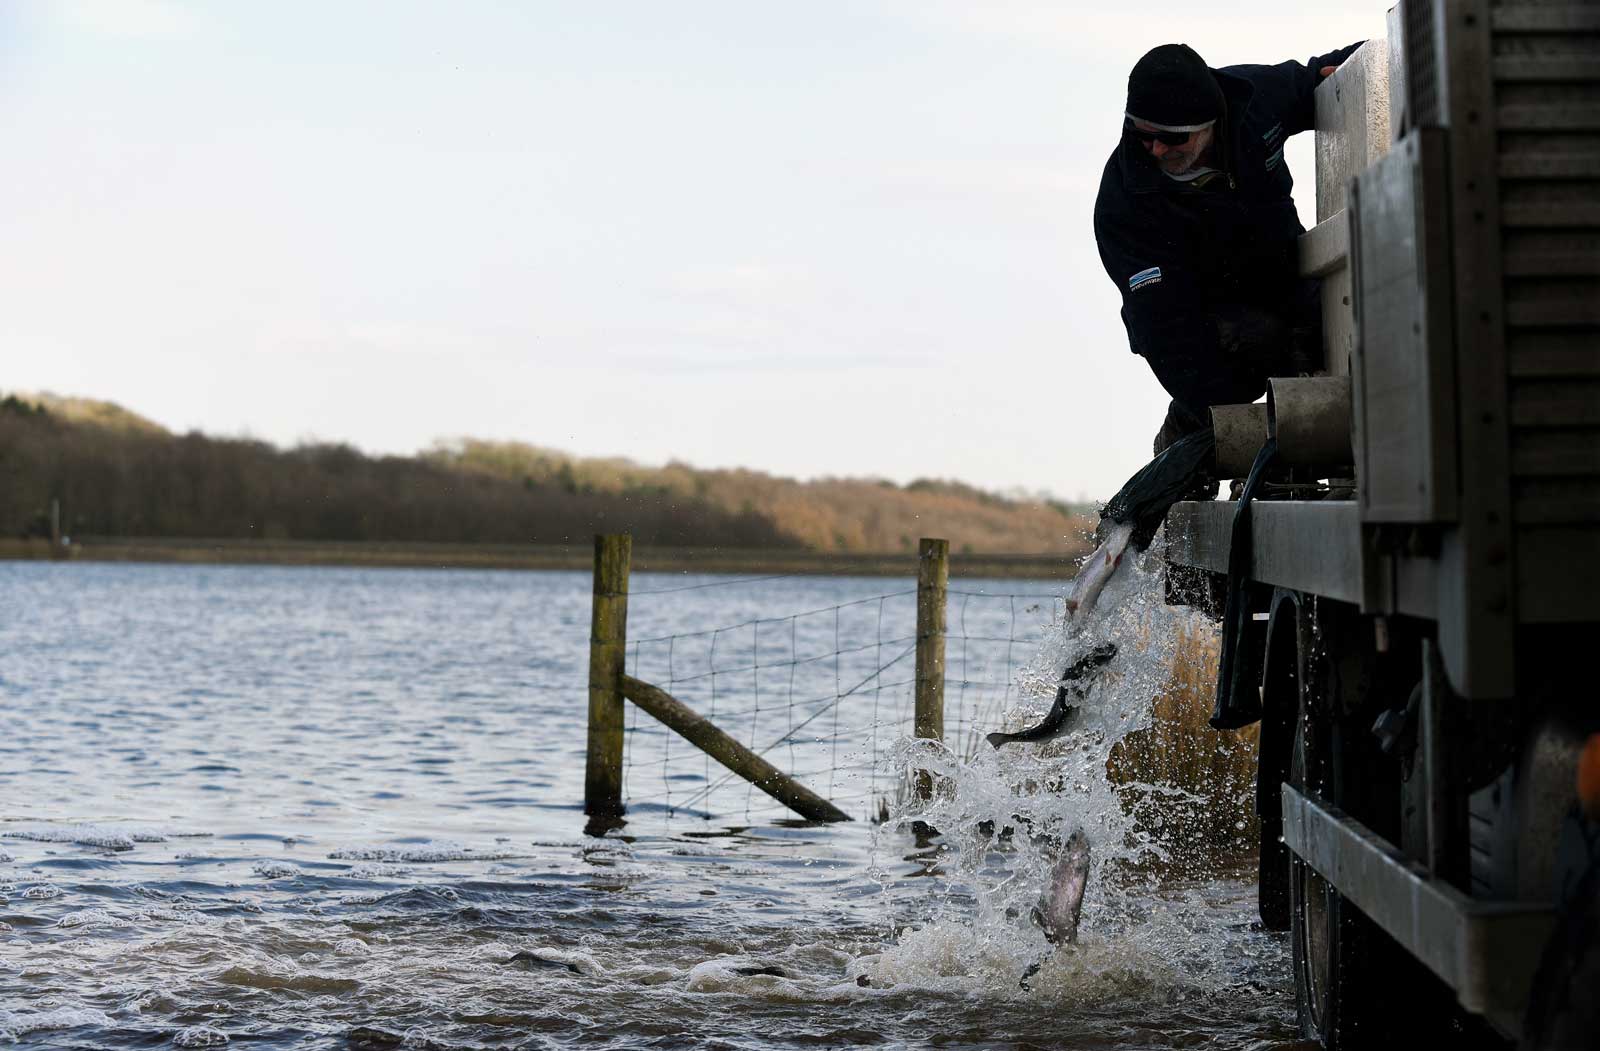 Trout treat for anglers as 6,500 fish added to Fewston reservoir